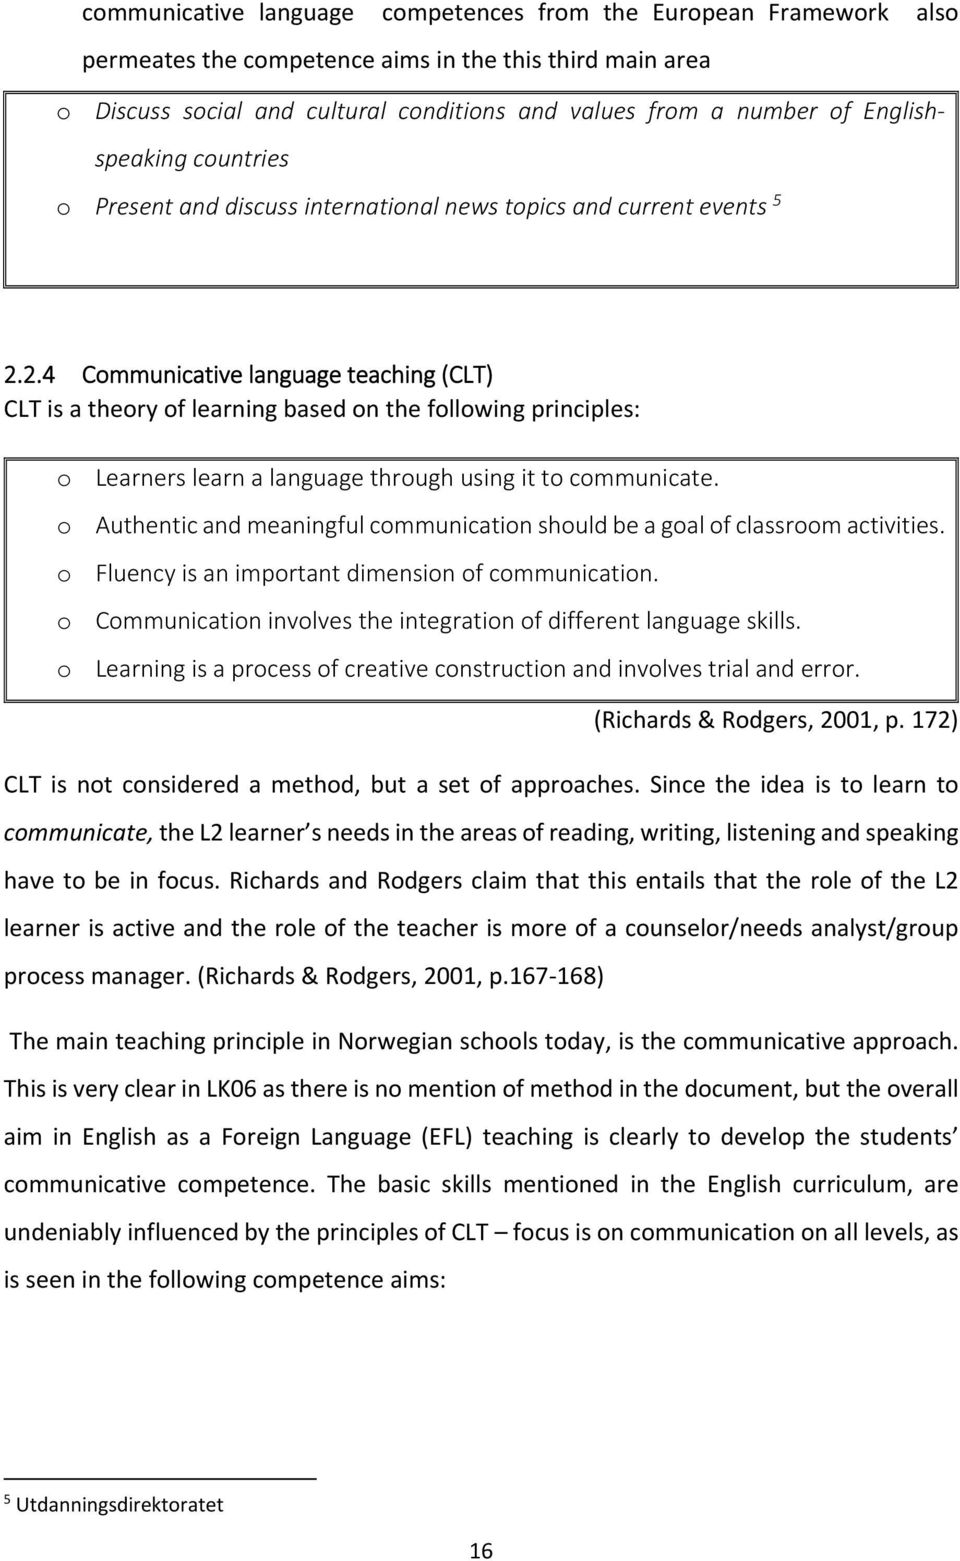 2.4 Communicative language teaching (CLT) CLT is a theory of learning based on the following principles: o Learners learn a language through using it to communicate.